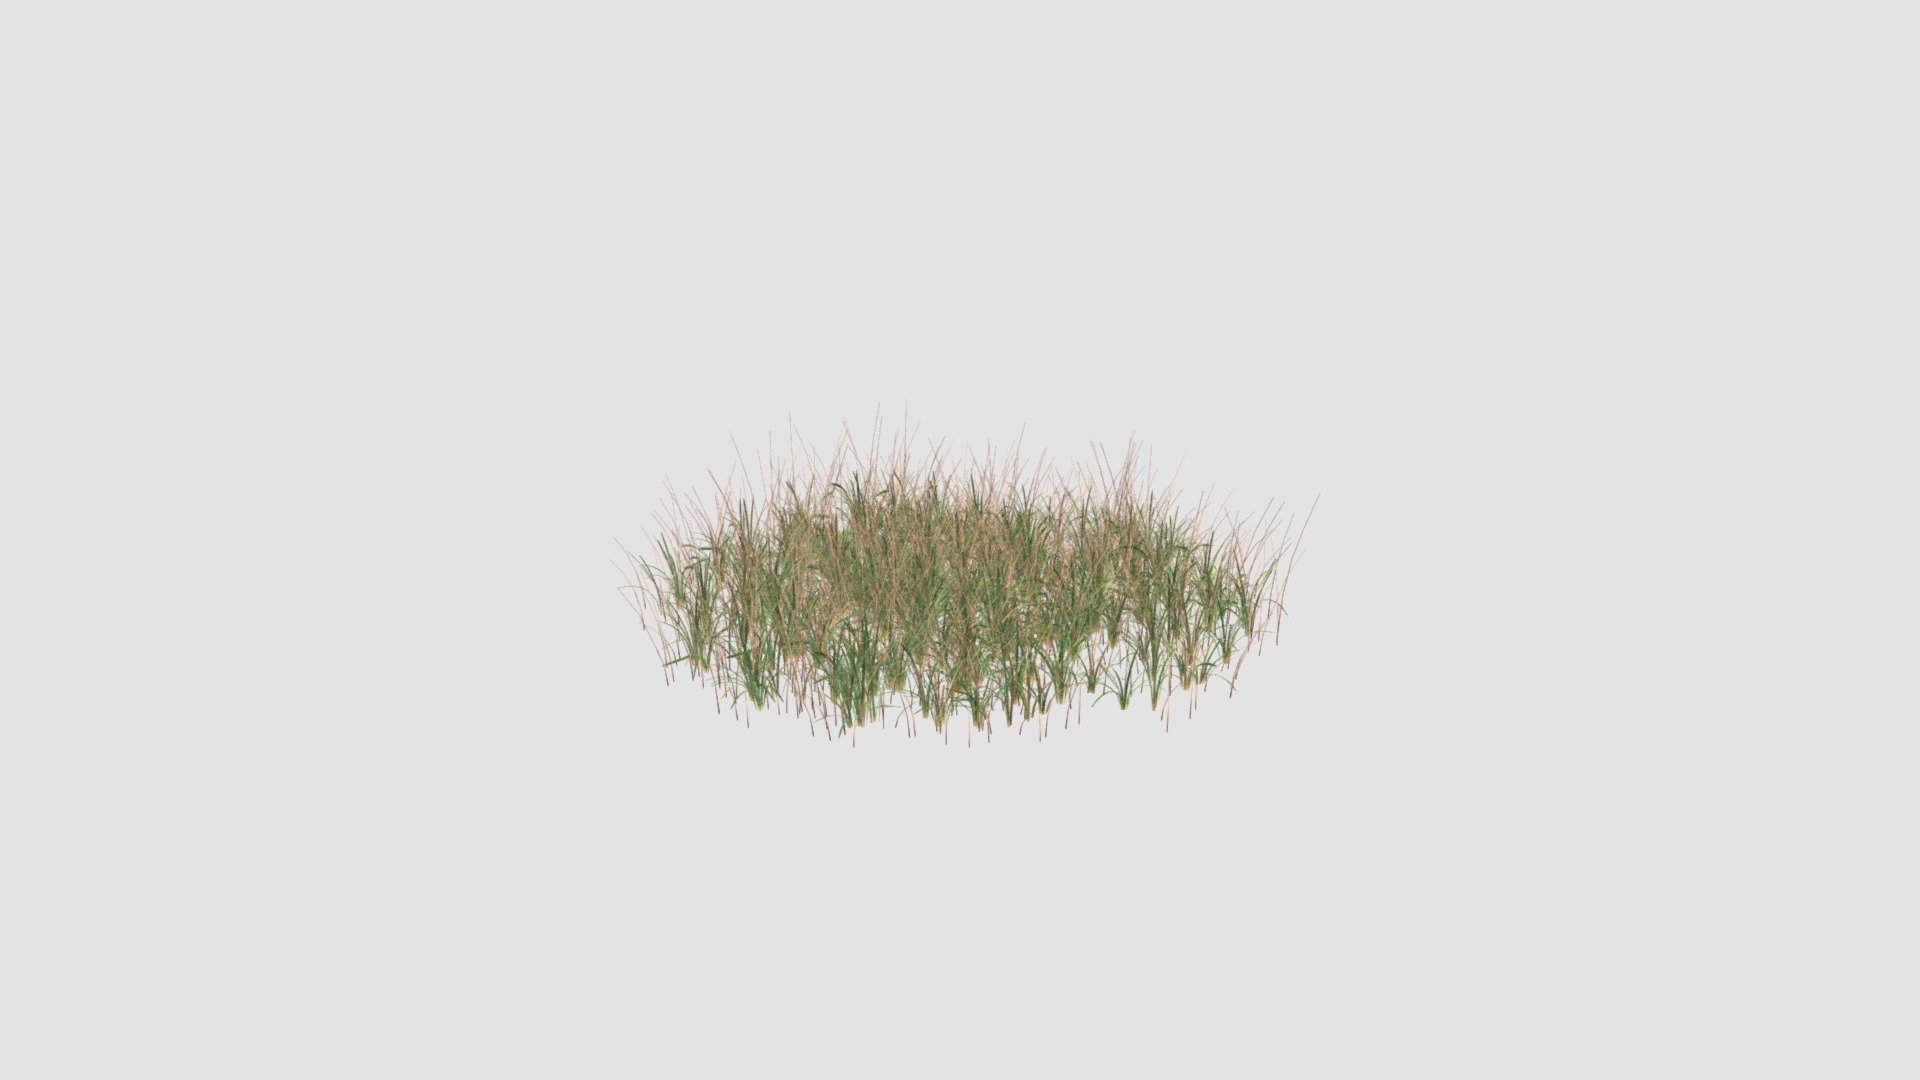 Highly detailed 3d model of plant with all textures, shaders and materials. It is ready to use, just put it into your scene 3d model